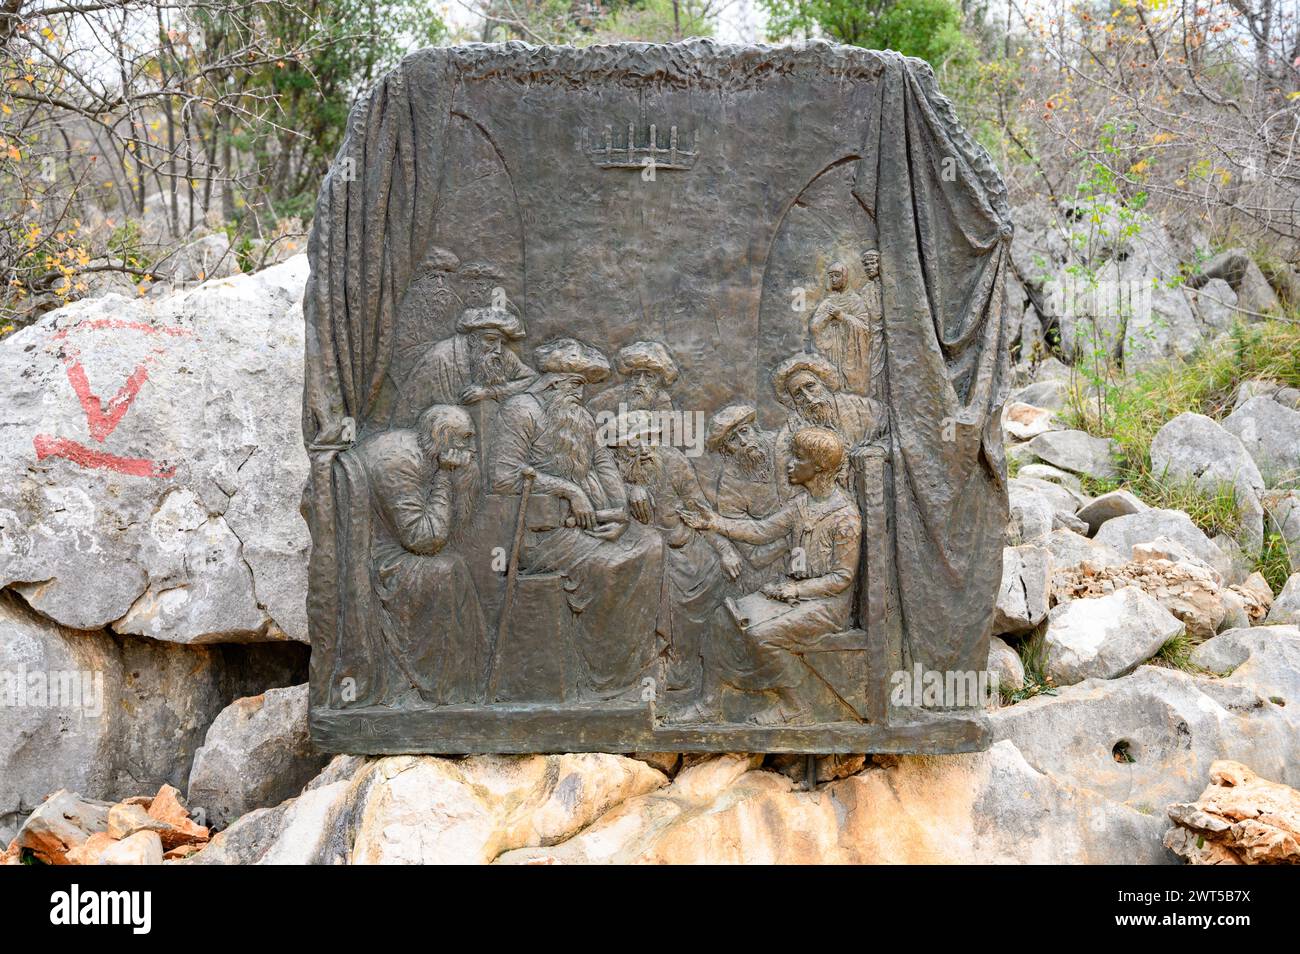 The Finding of Jesus in the Temple – Fifth Joyful Mystery of the Rosary. A relief sculpture on Mount Podbrdo (the Hill of Apparitions) in Medjugorje. Stock Photo